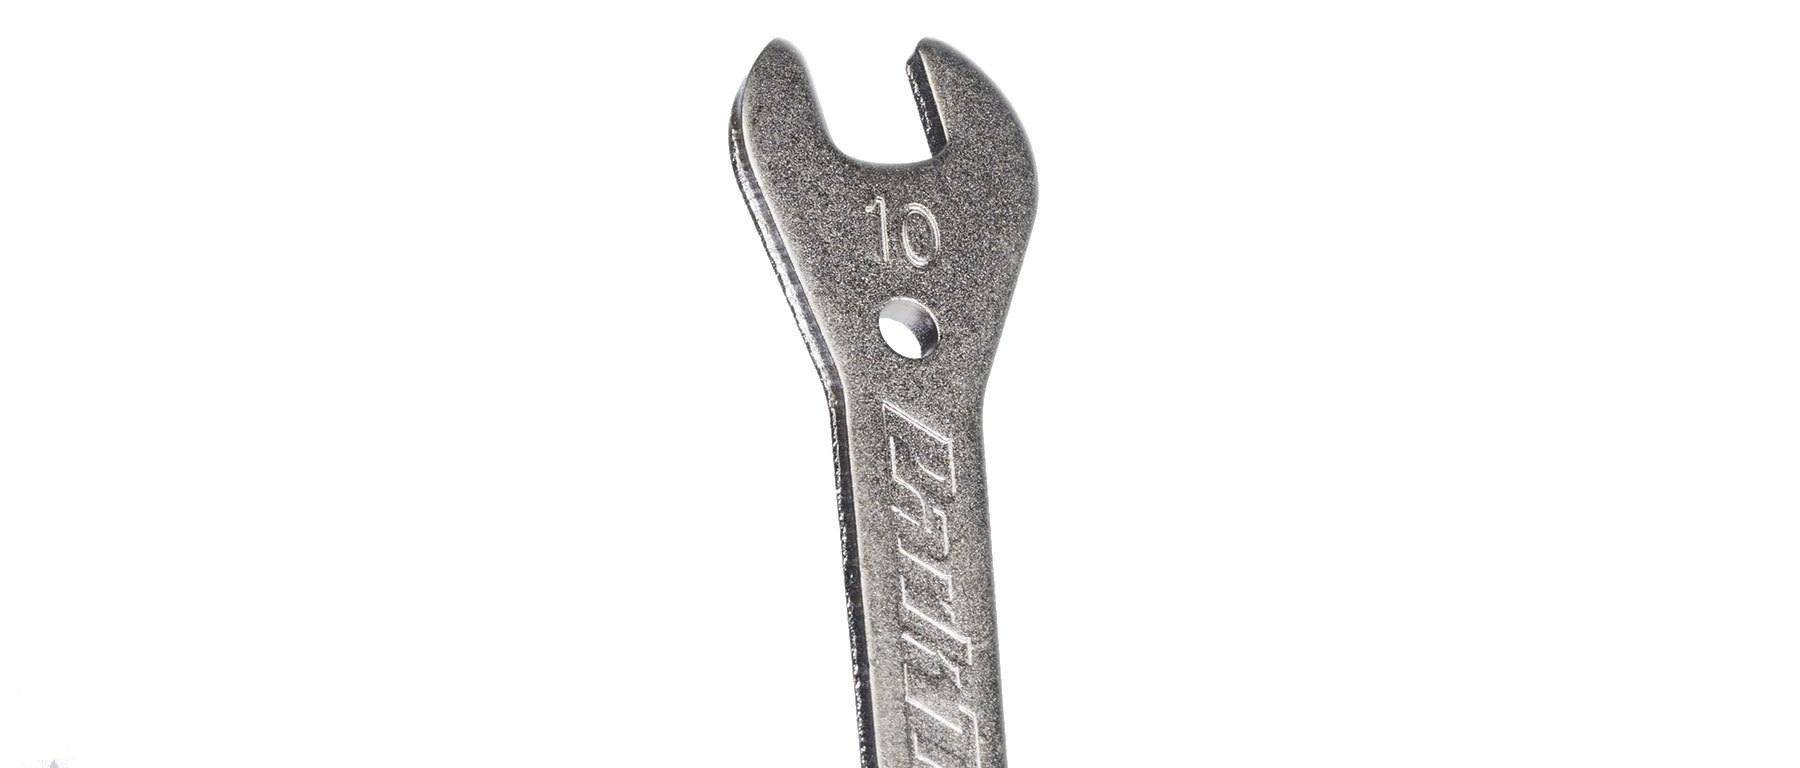 Park Tool CBW-1 Open End Wrench